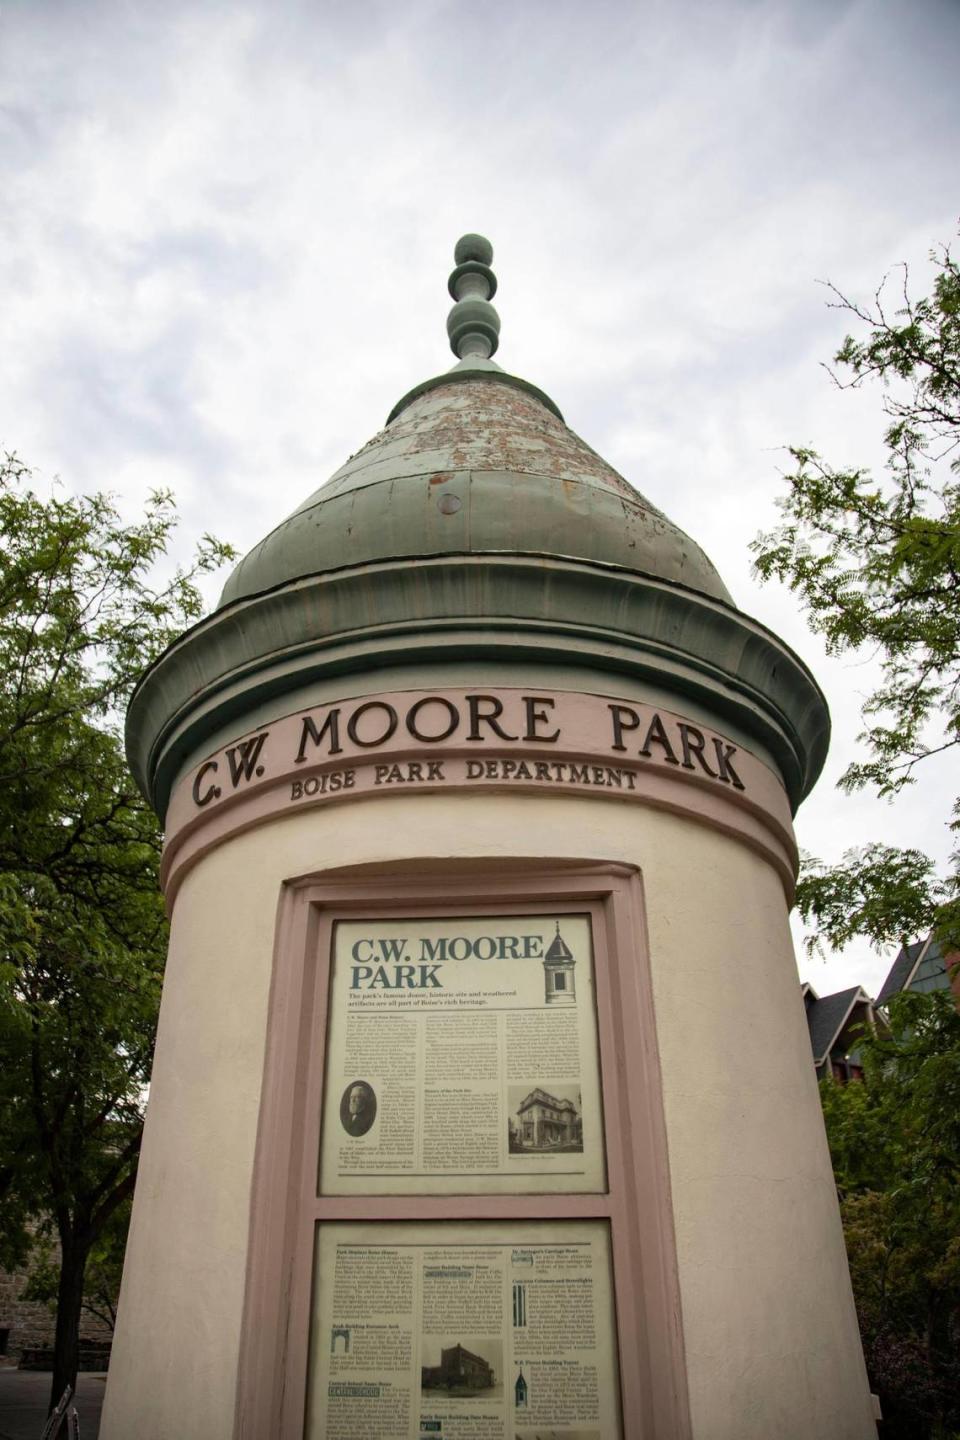 Downtown Boise’s C.W. Moore Park displays artifacts from buildings demolished during the urban renewal era, including a turret from the W.E. Pierce Building, demolished in 1975. Sarah A. Miller/smiller@idahostatesman.com